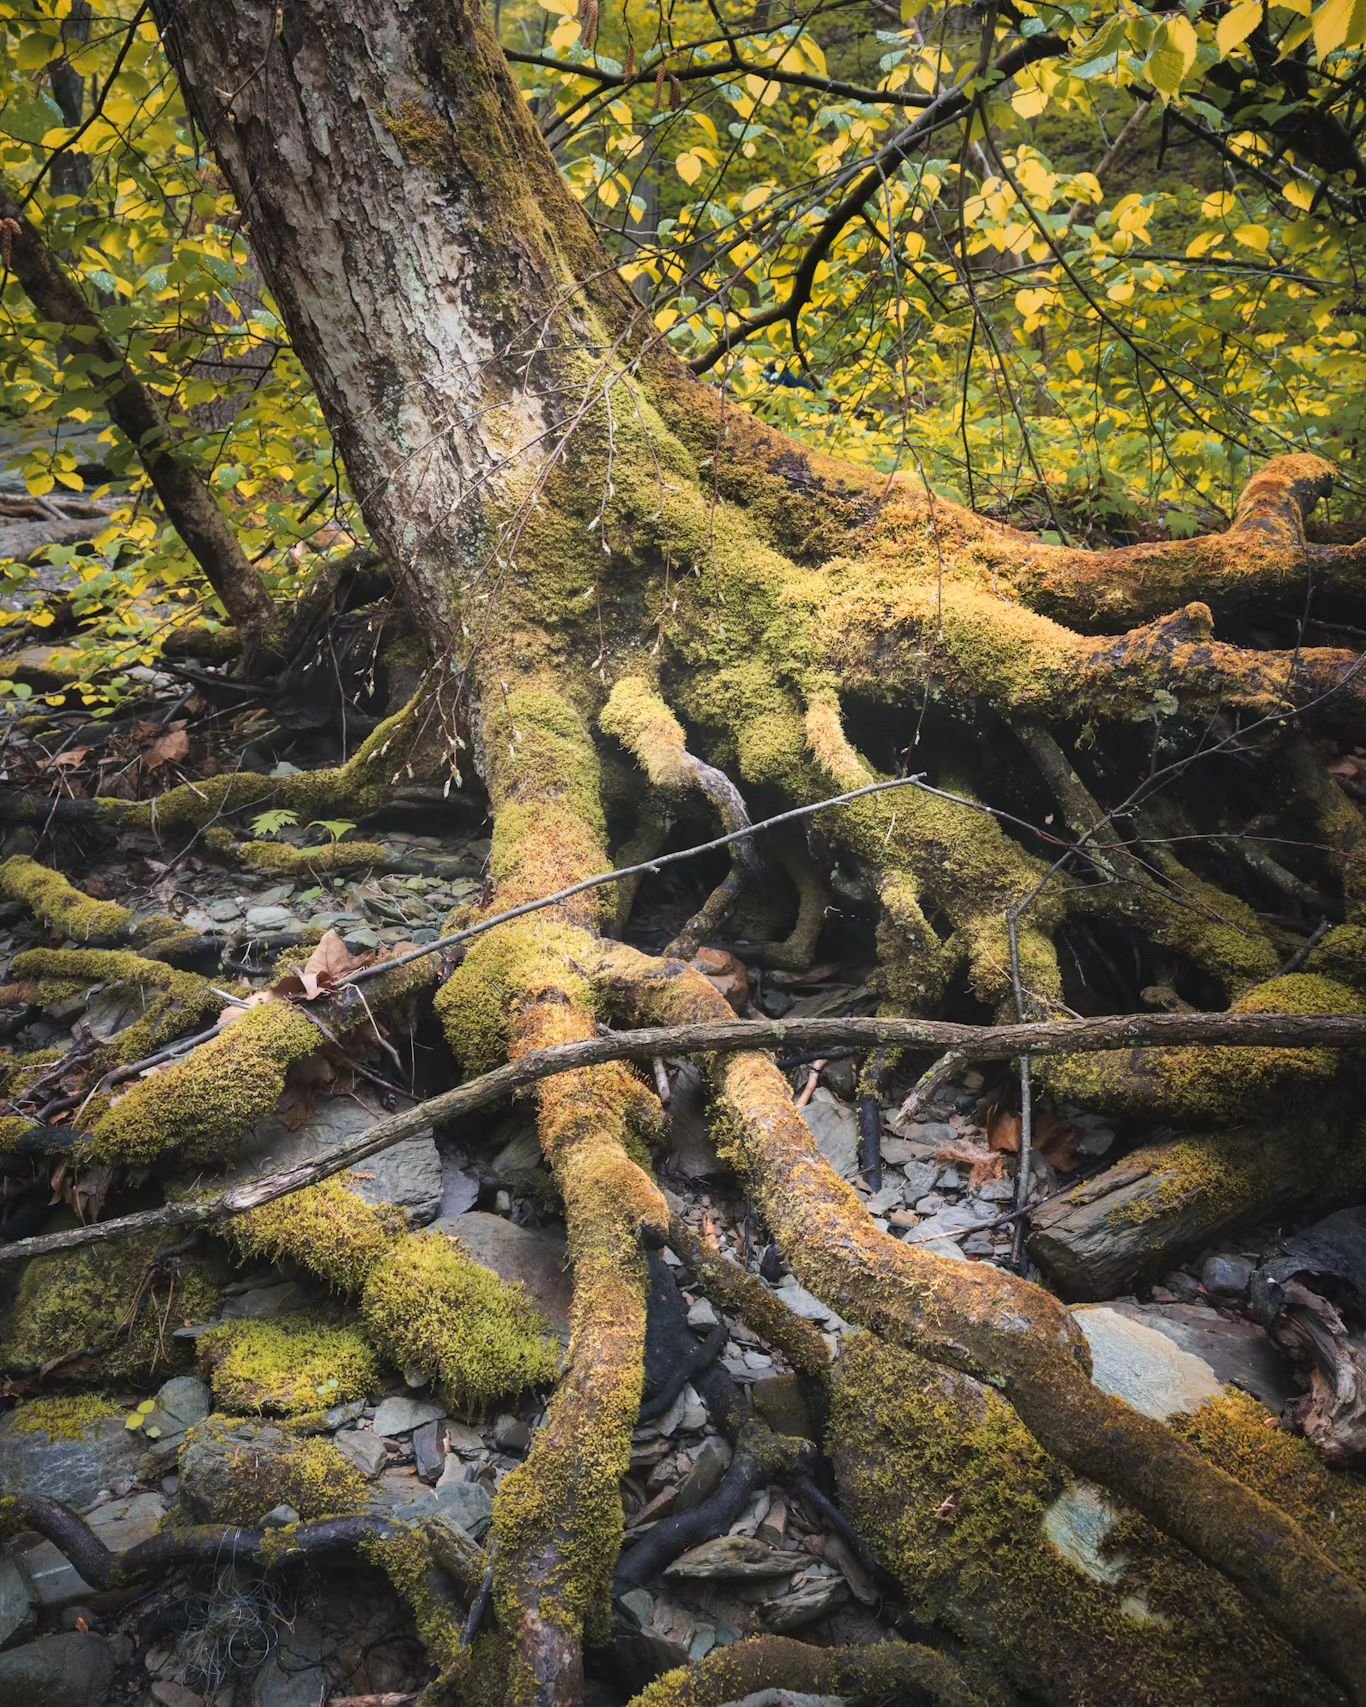 In the beginning of my days with a camera, I would spend a lot of time in the woods trying desperately to capture images of tree roots. I'm always fascinated by their structure, but I've never really been good at capturing them because I wasn't great